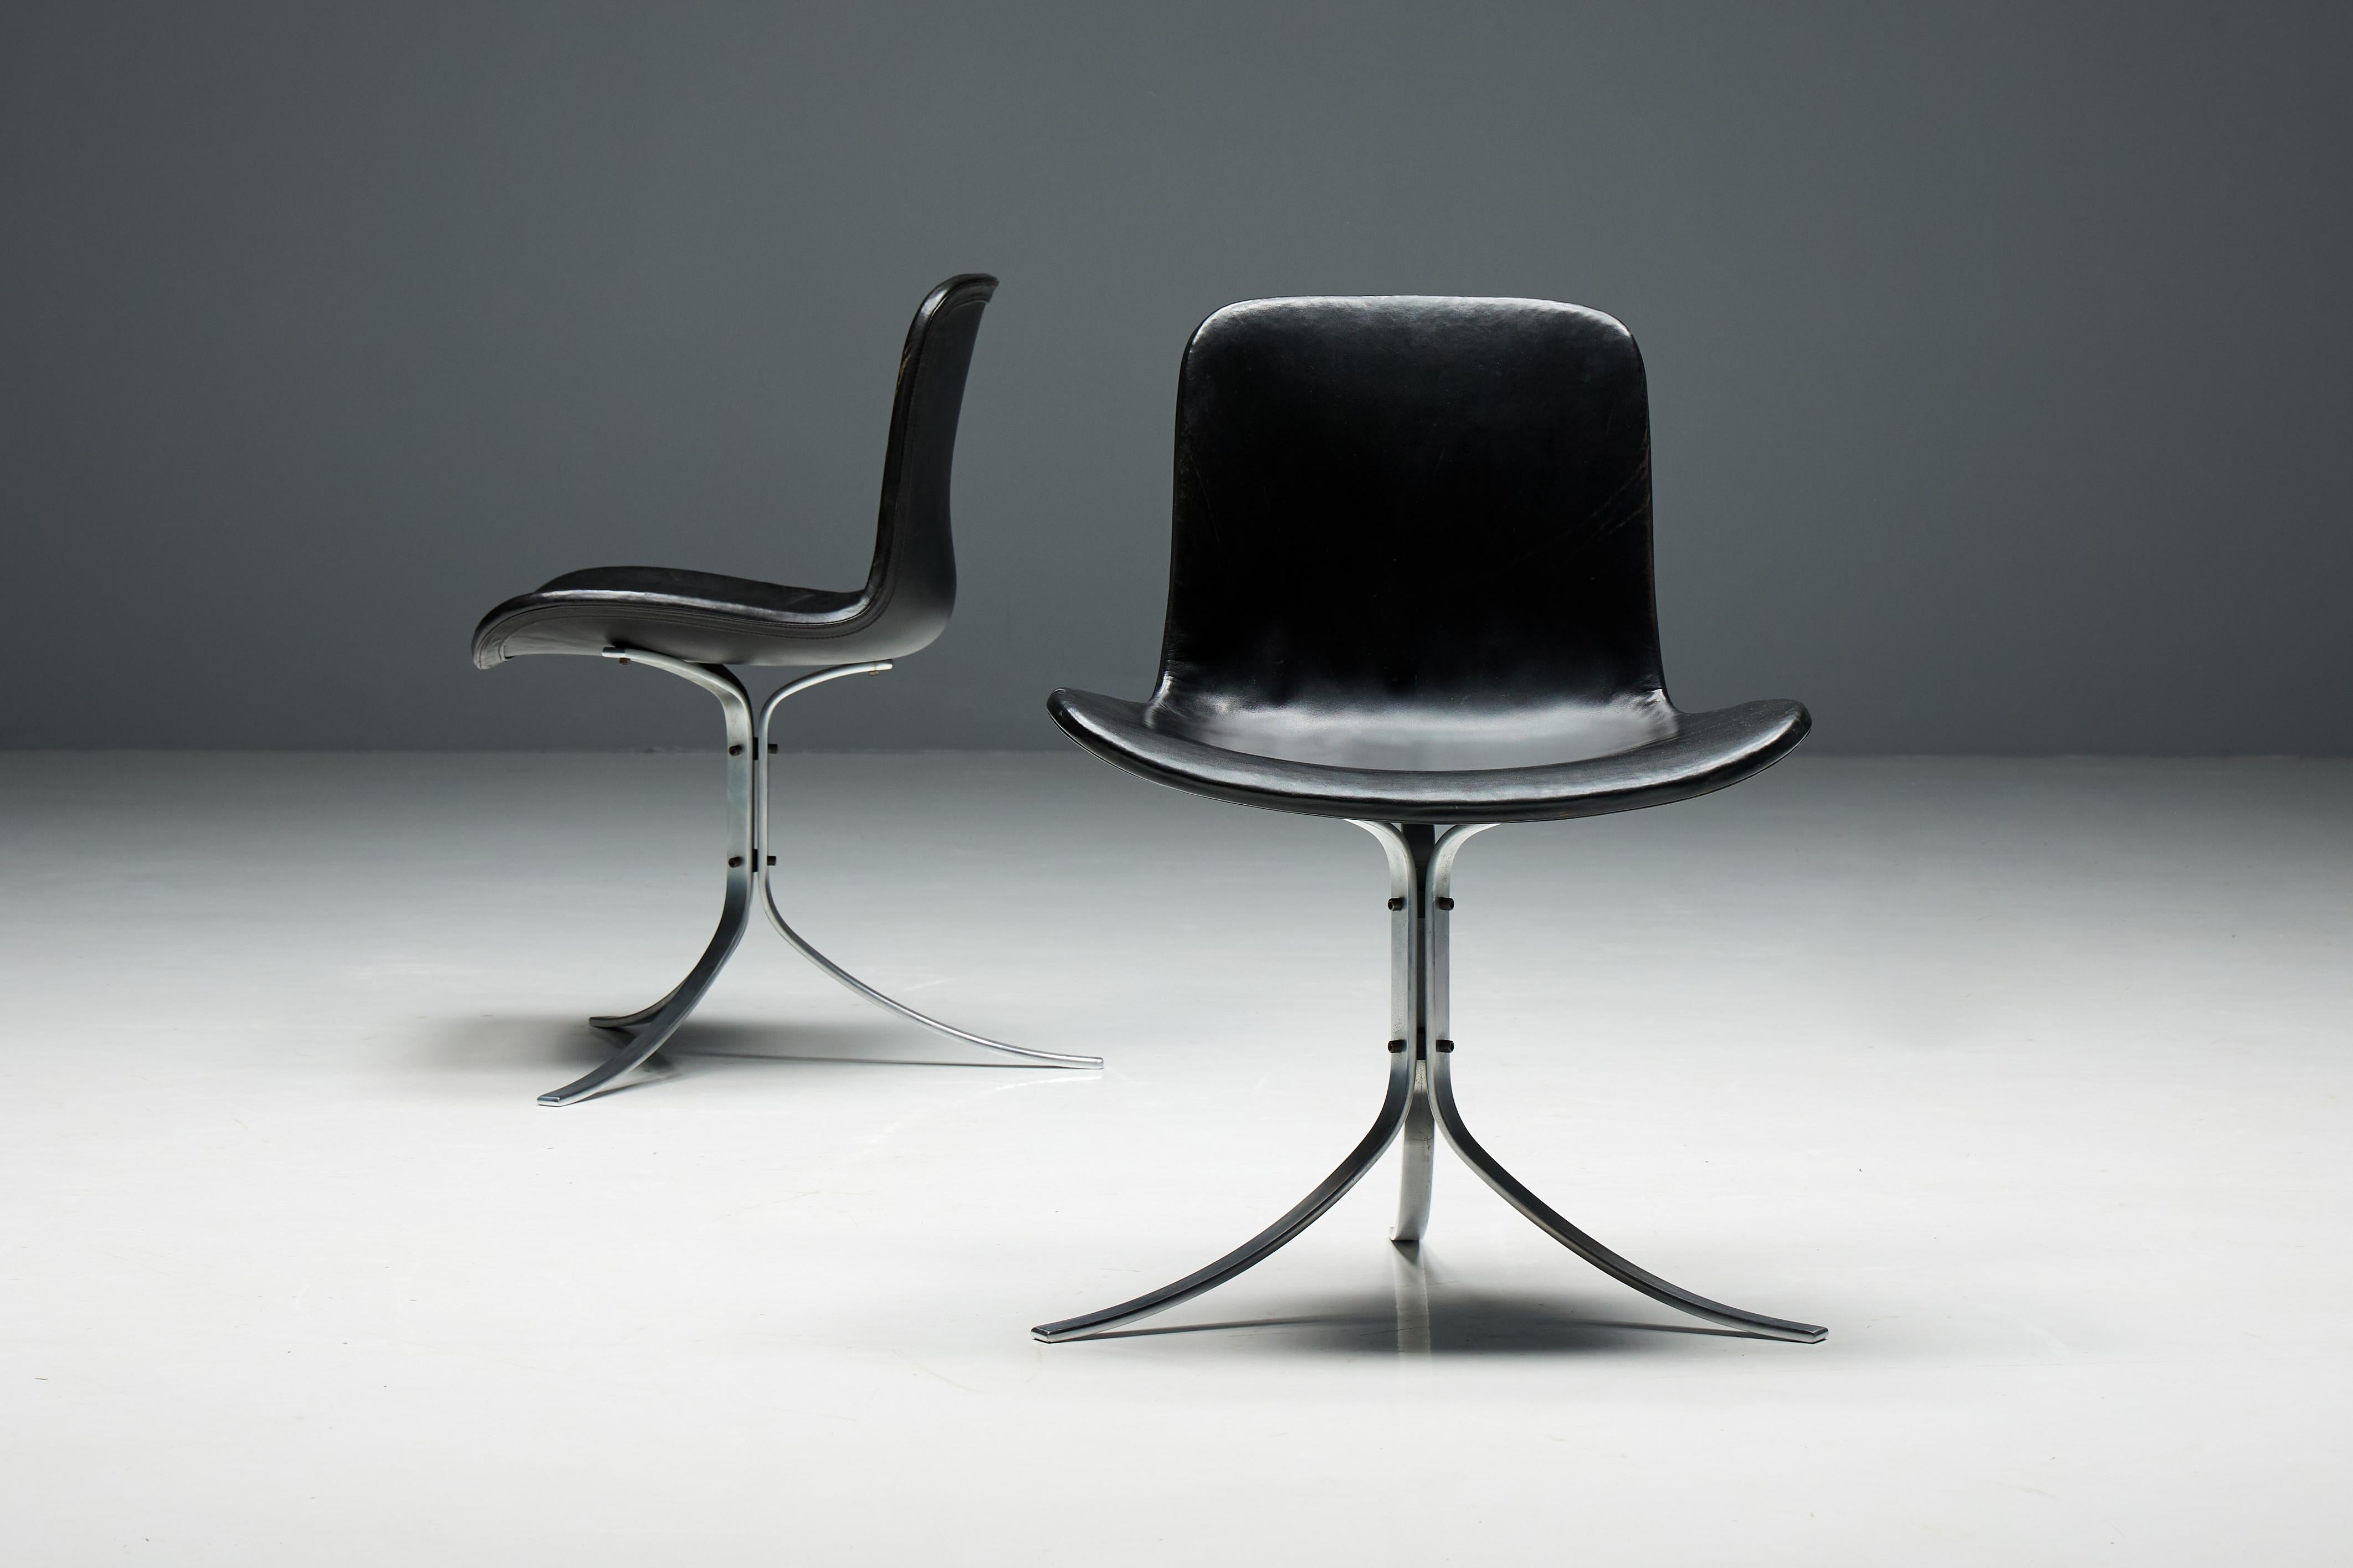 The PK9 chair, also known as the Tulip chair, designed by Poul Kjærholm and produced by E. Kold Christensen. Its distinctive silhouette, characterized by three impeccably crafted satin-brushed stainless steel springs that serve as columns, provides